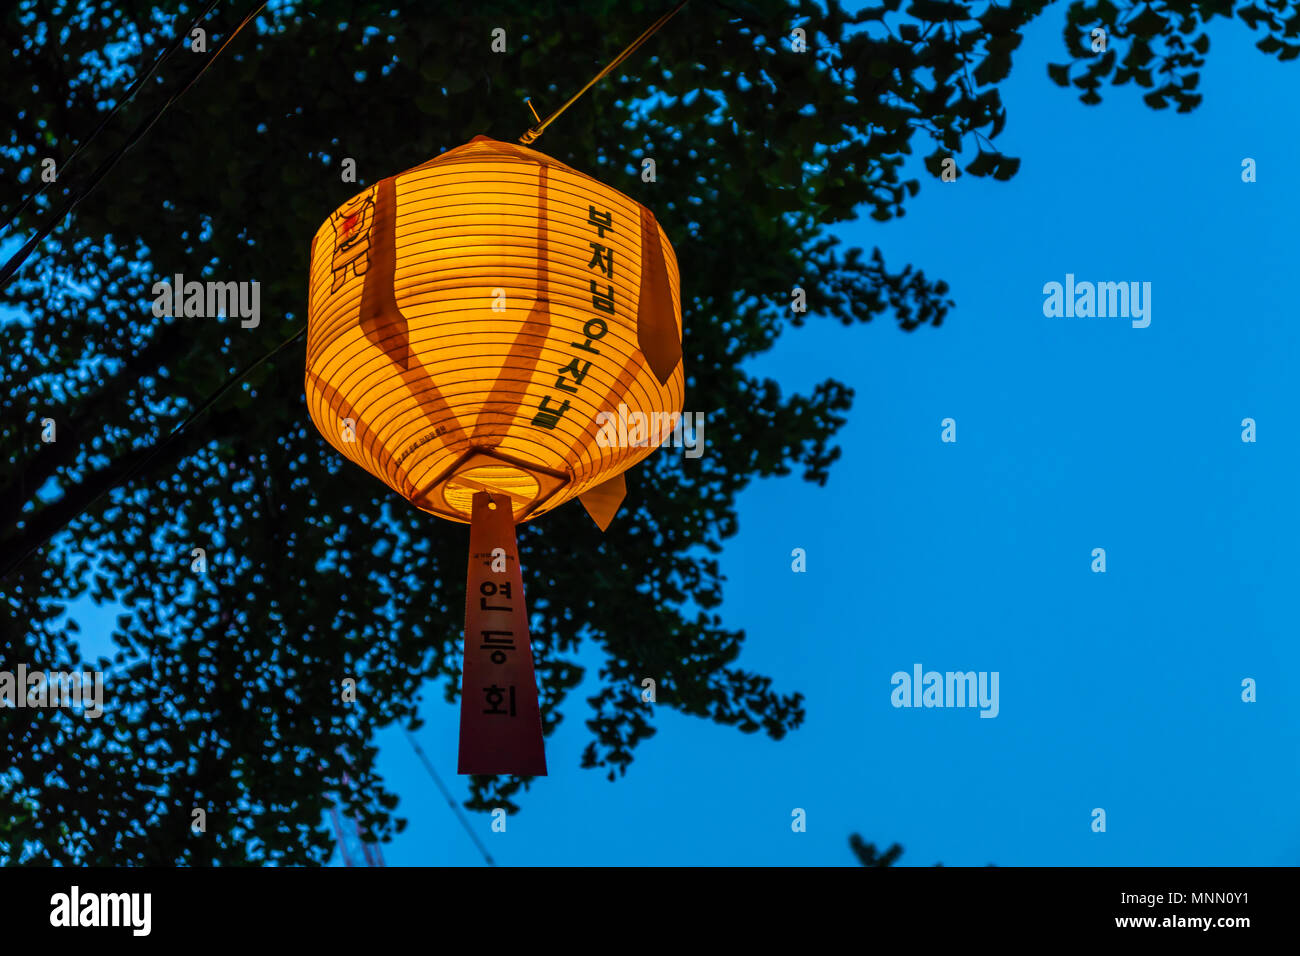 A lantern at a Buddhist Temple in Seoul, South Korea at the Lotus Lantern Festival in celebration of Buddha's birthday. Stock Photo